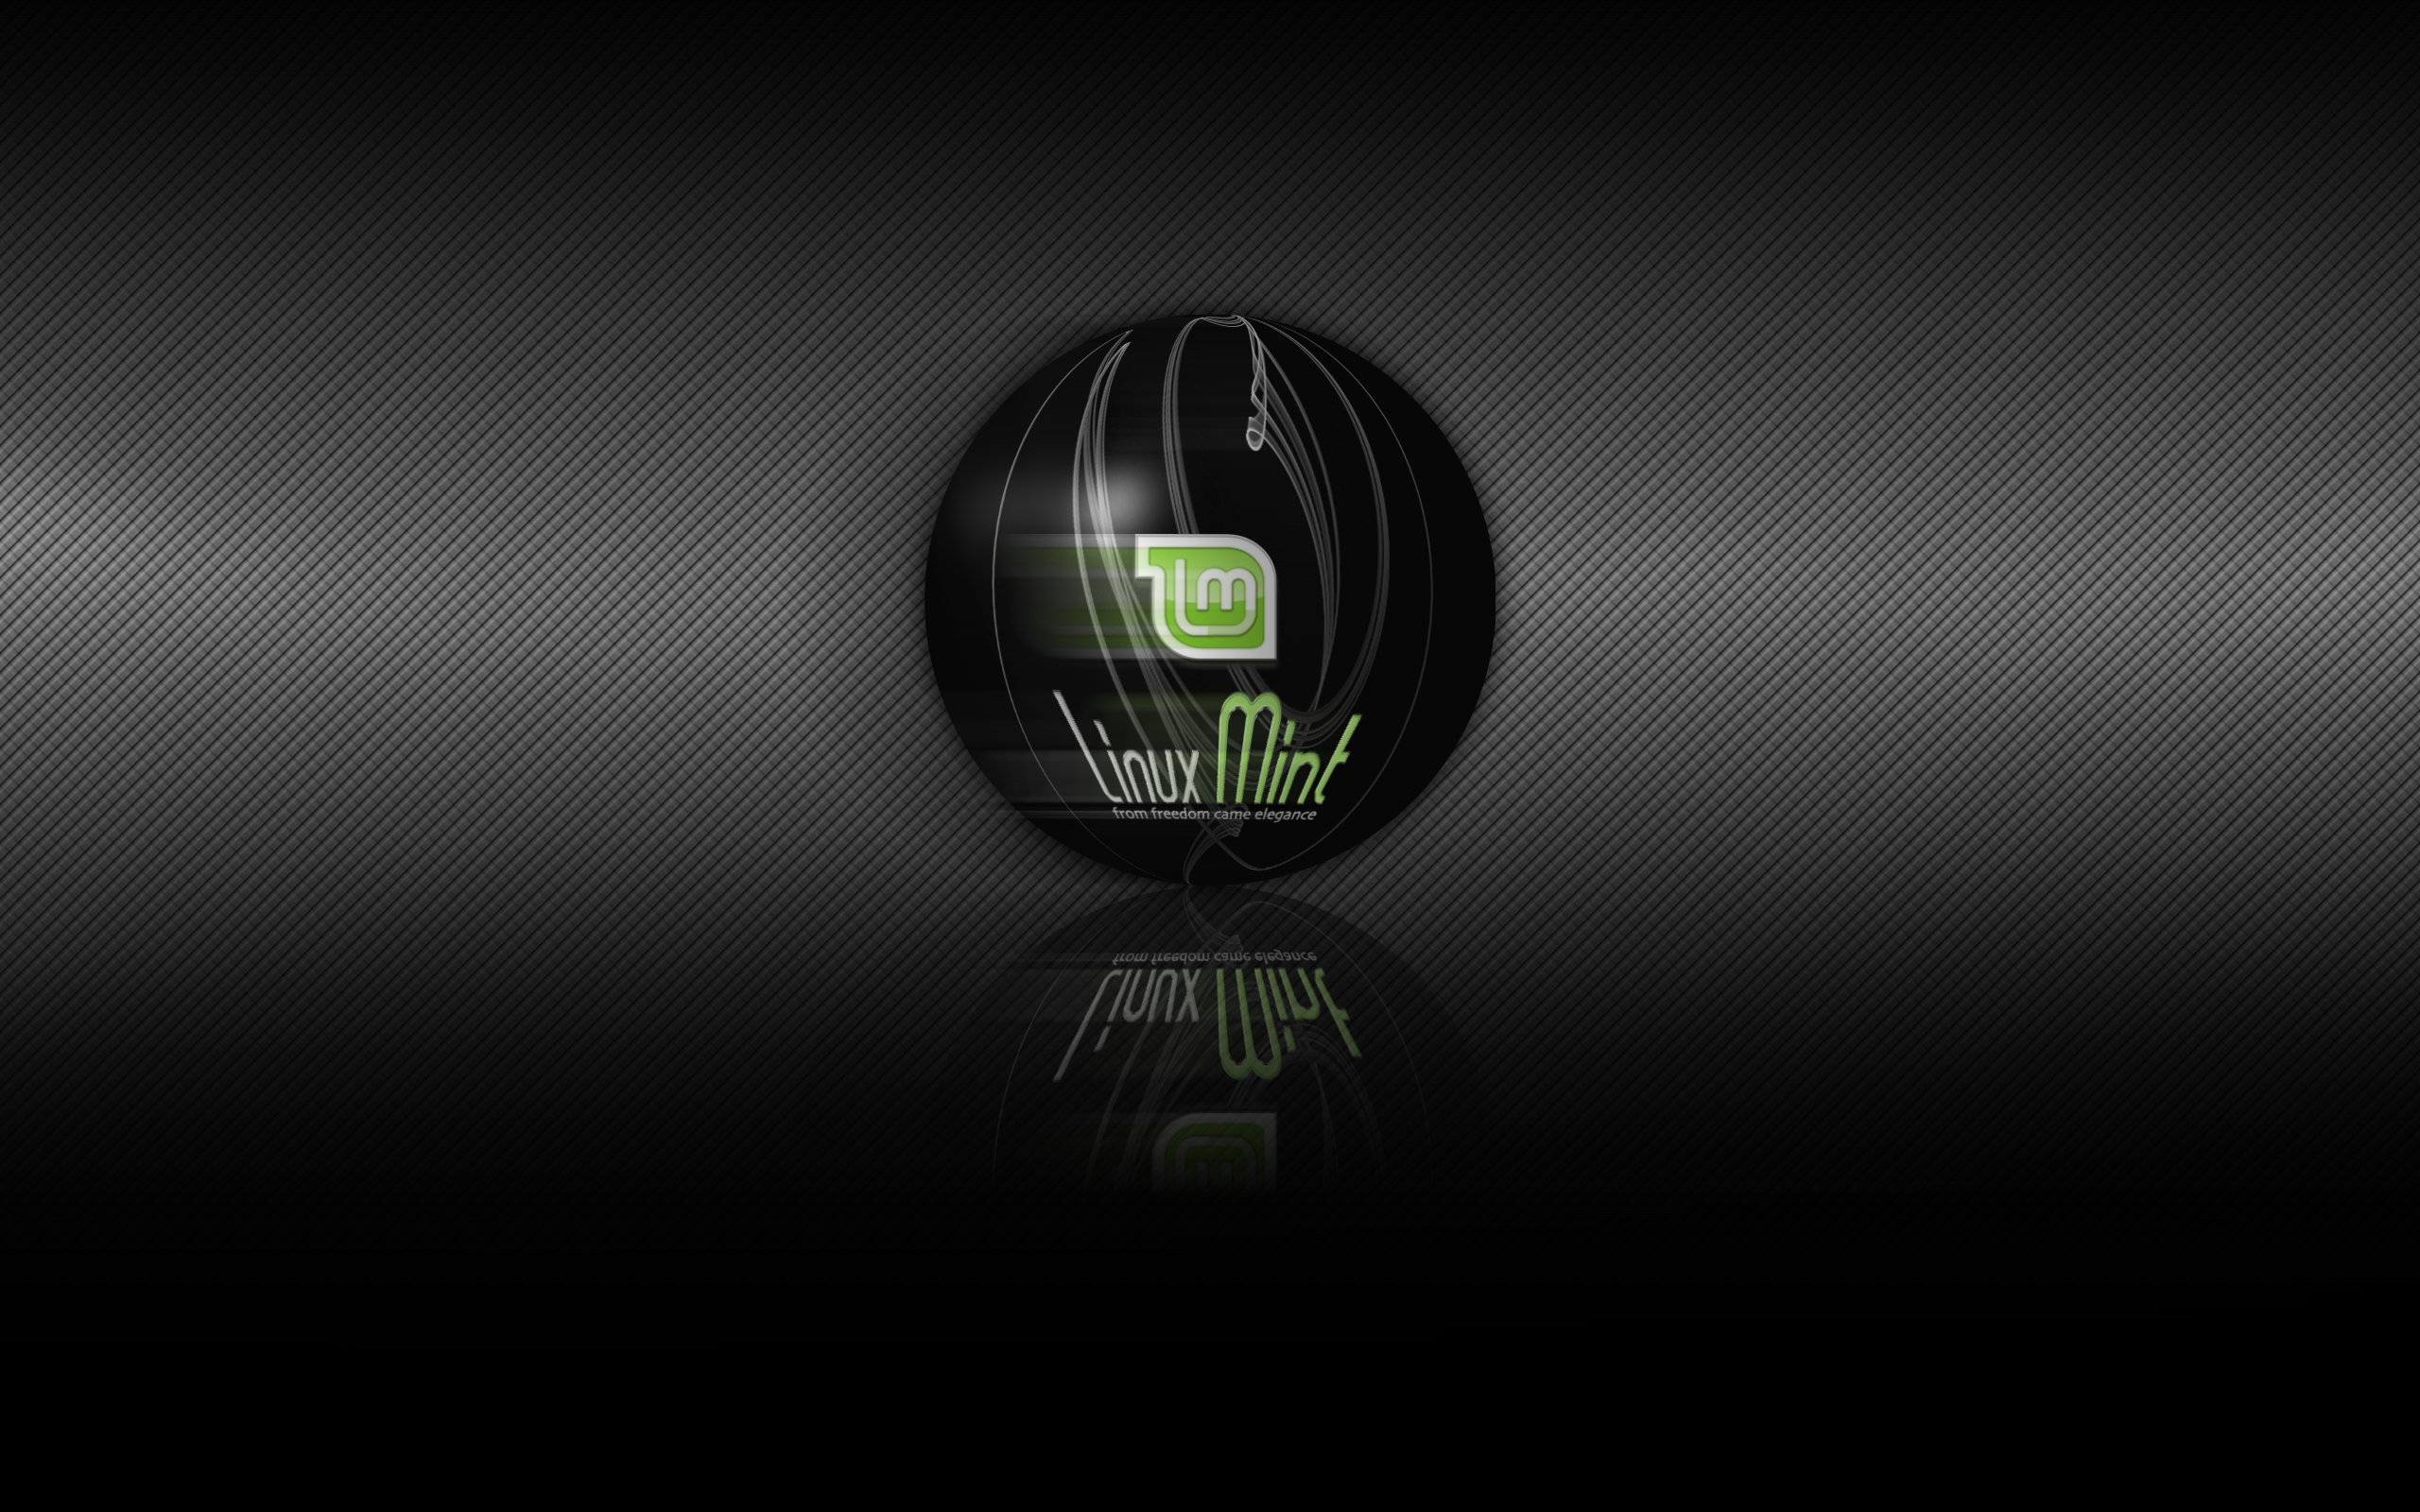 Wallpaper Of The Month December Submissions Linux Mint Forums